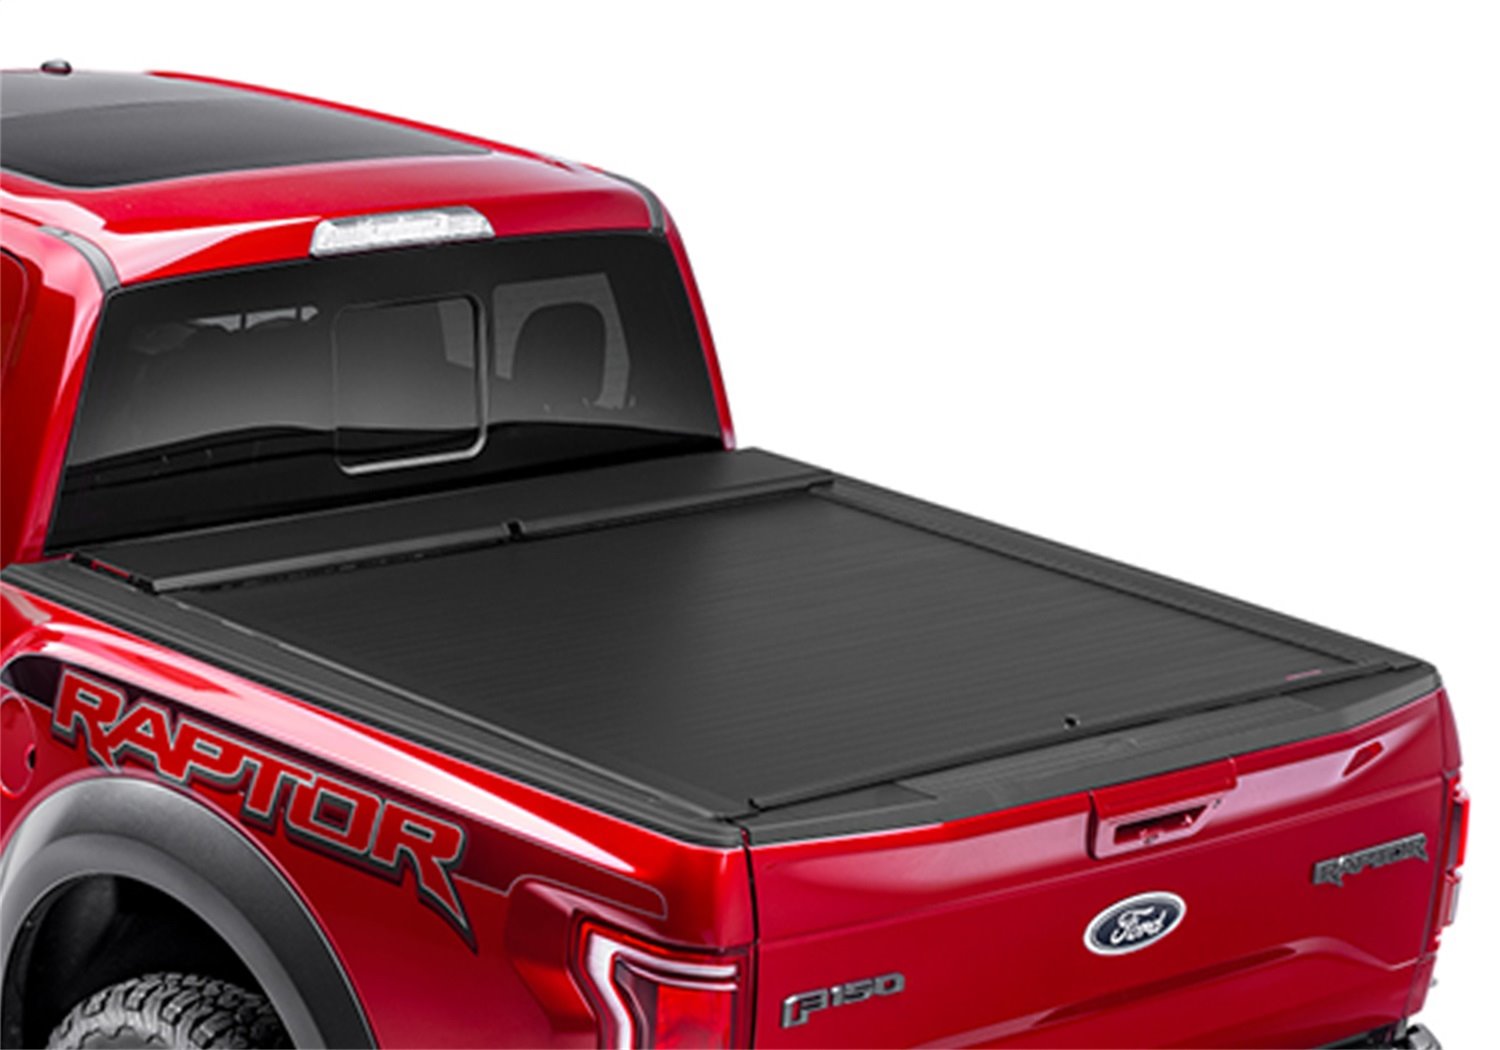 BT102A A-Series Locking Retractable Truck Bed Cover for 2015-2020 Ford F-150 [6.7 ft. Bed]